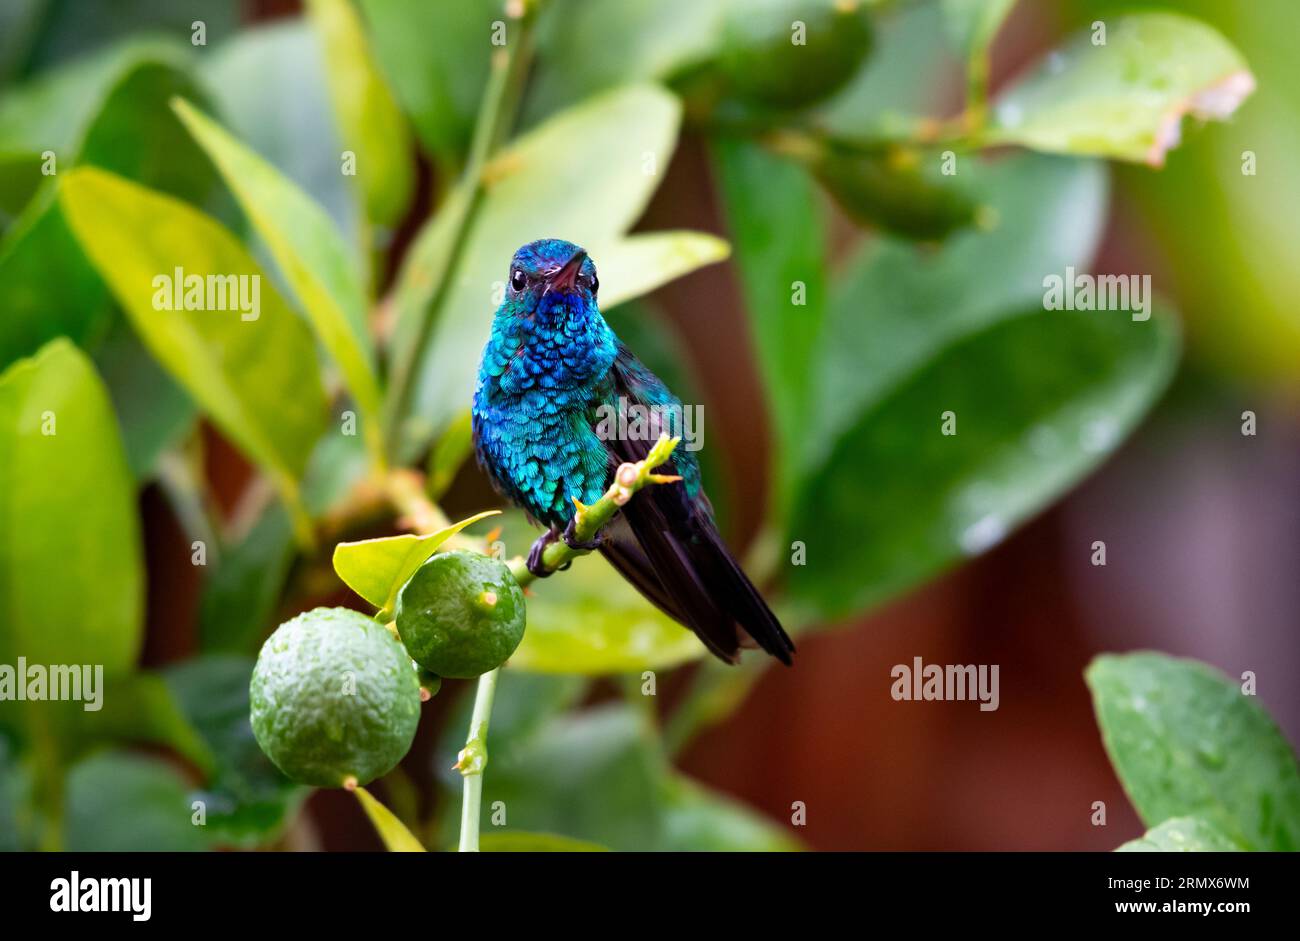 Iridescent Blue chinned hummingbird, Chlorestes notata, perching next to limes in a citrus tree Stock Photo